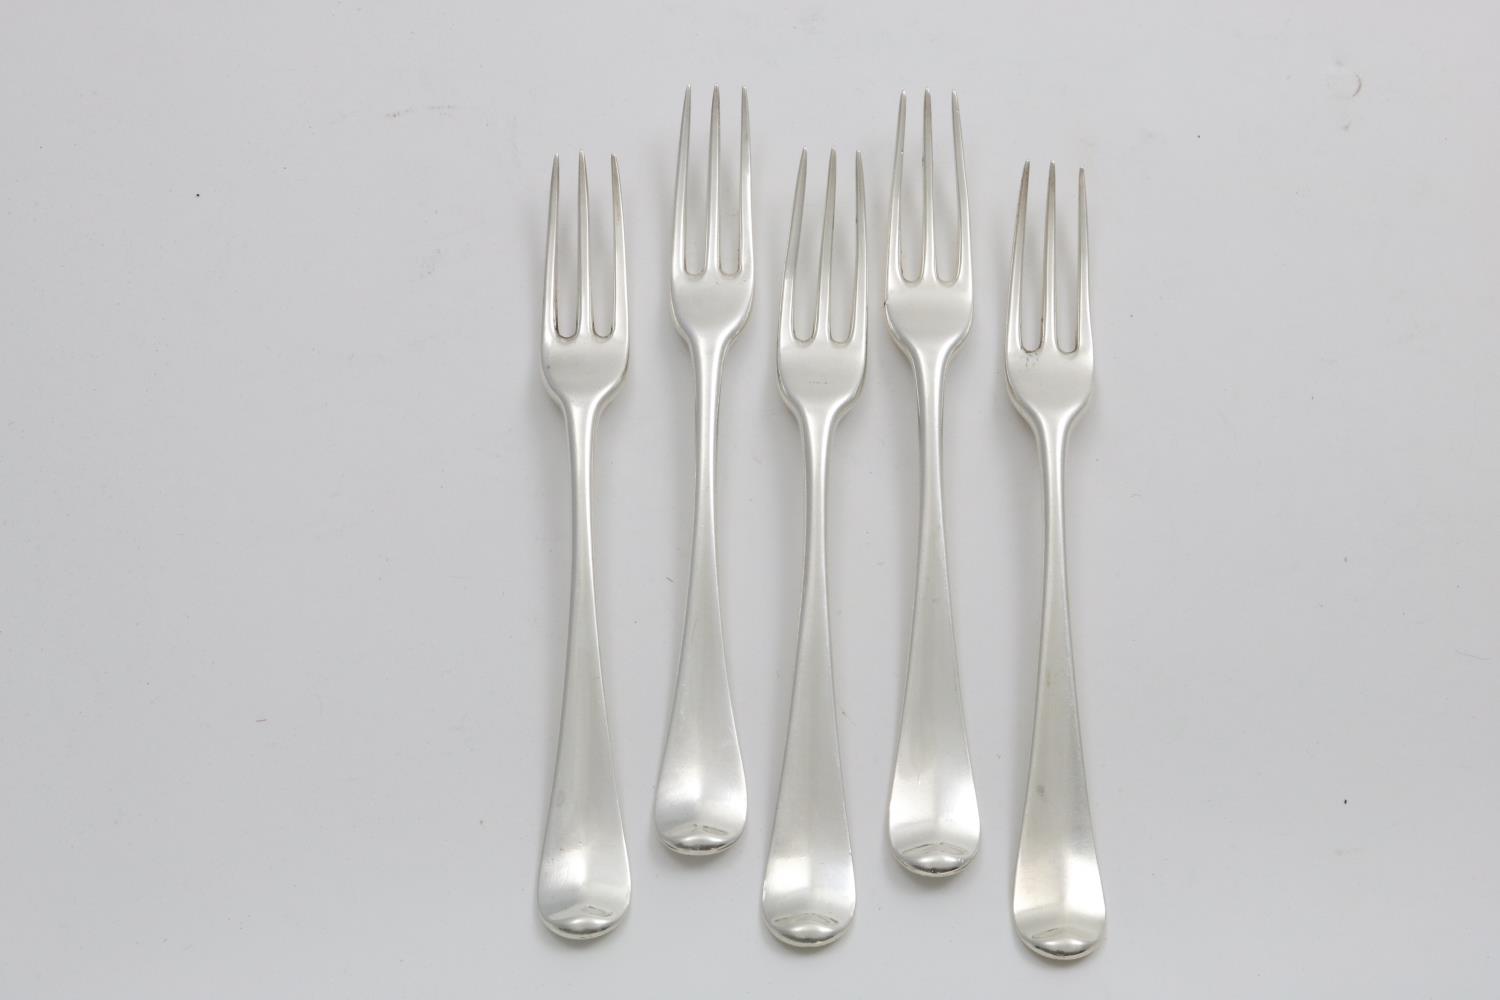 A SET OF FIVE LATE GEORGE II HANOVERIAN THREE-PRONG TABLE FORKS engraved with a coat of arms, by